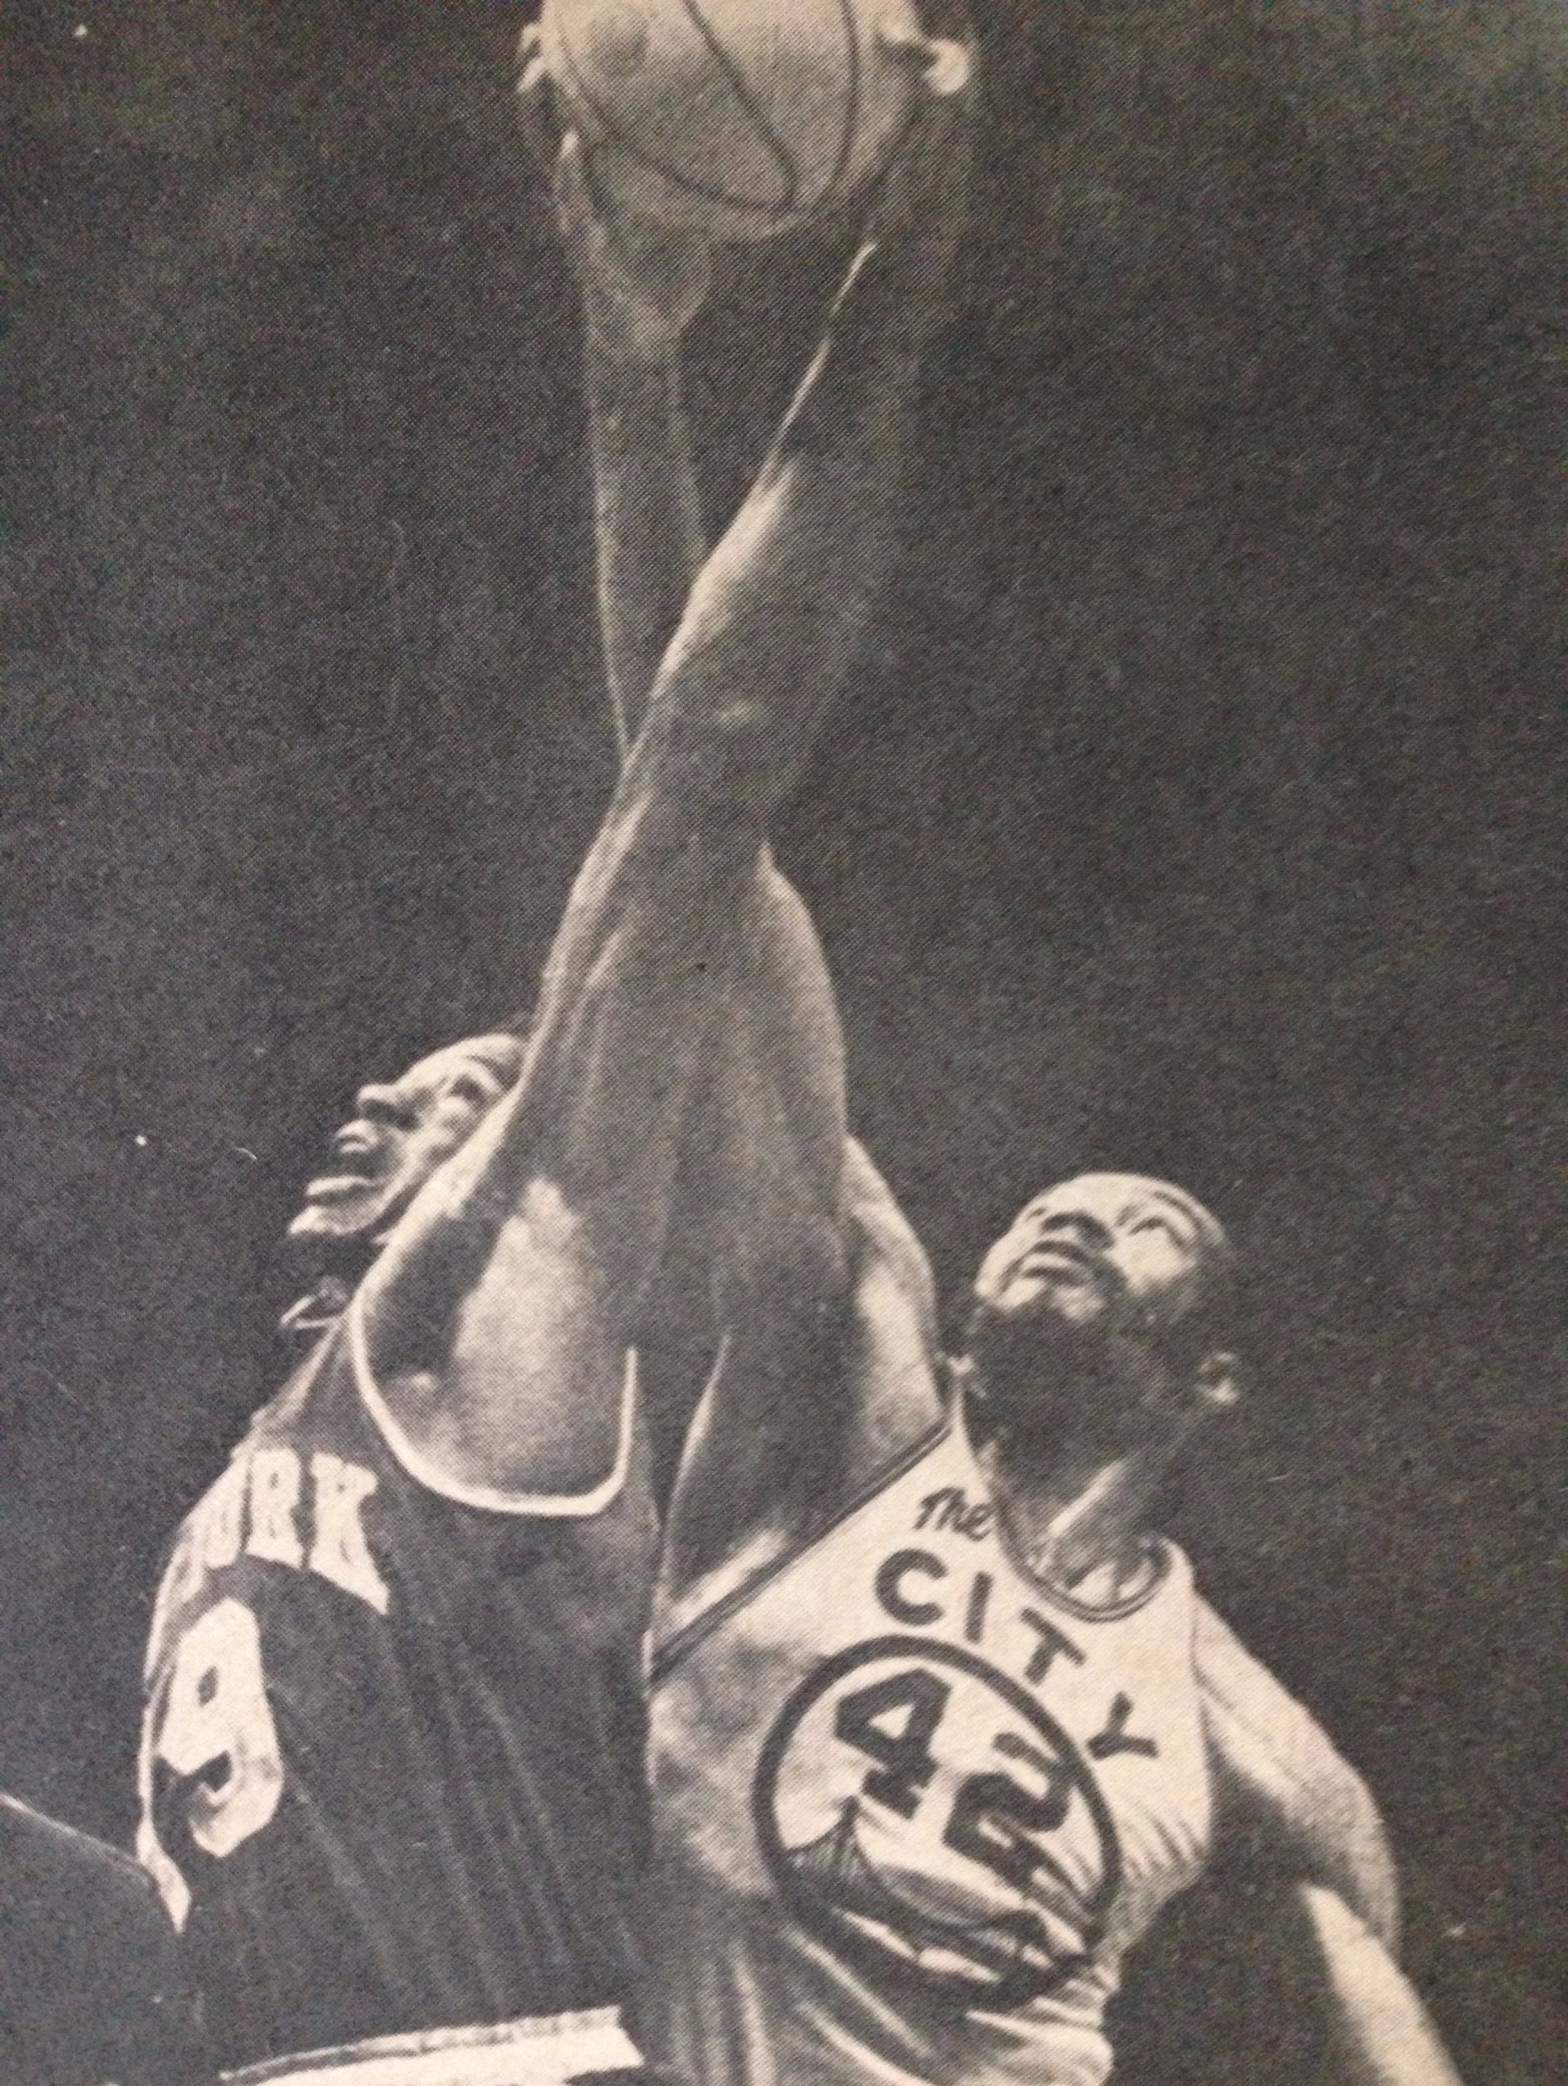 Big Nate Thurmond a center of attention